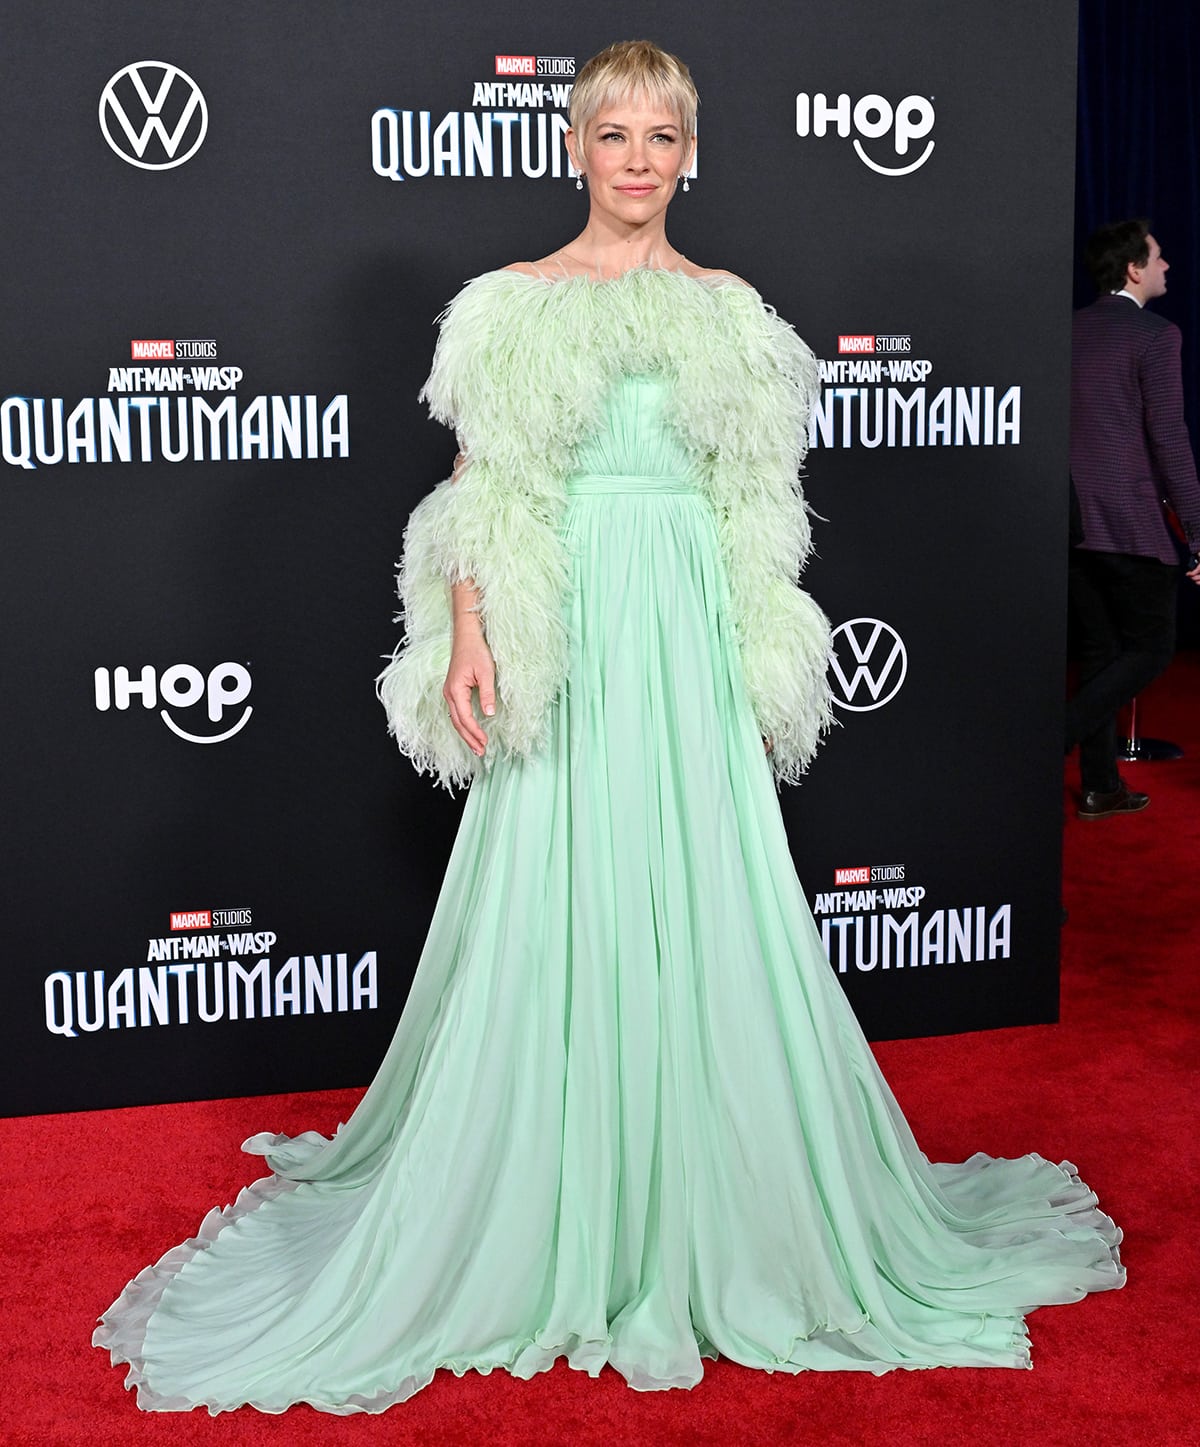 Evangeline Lilly arrives at the Los Angeles premiere of Ant-Man and the Wasp: Quantumania in a stunning green feathered gown on February 6, 2023